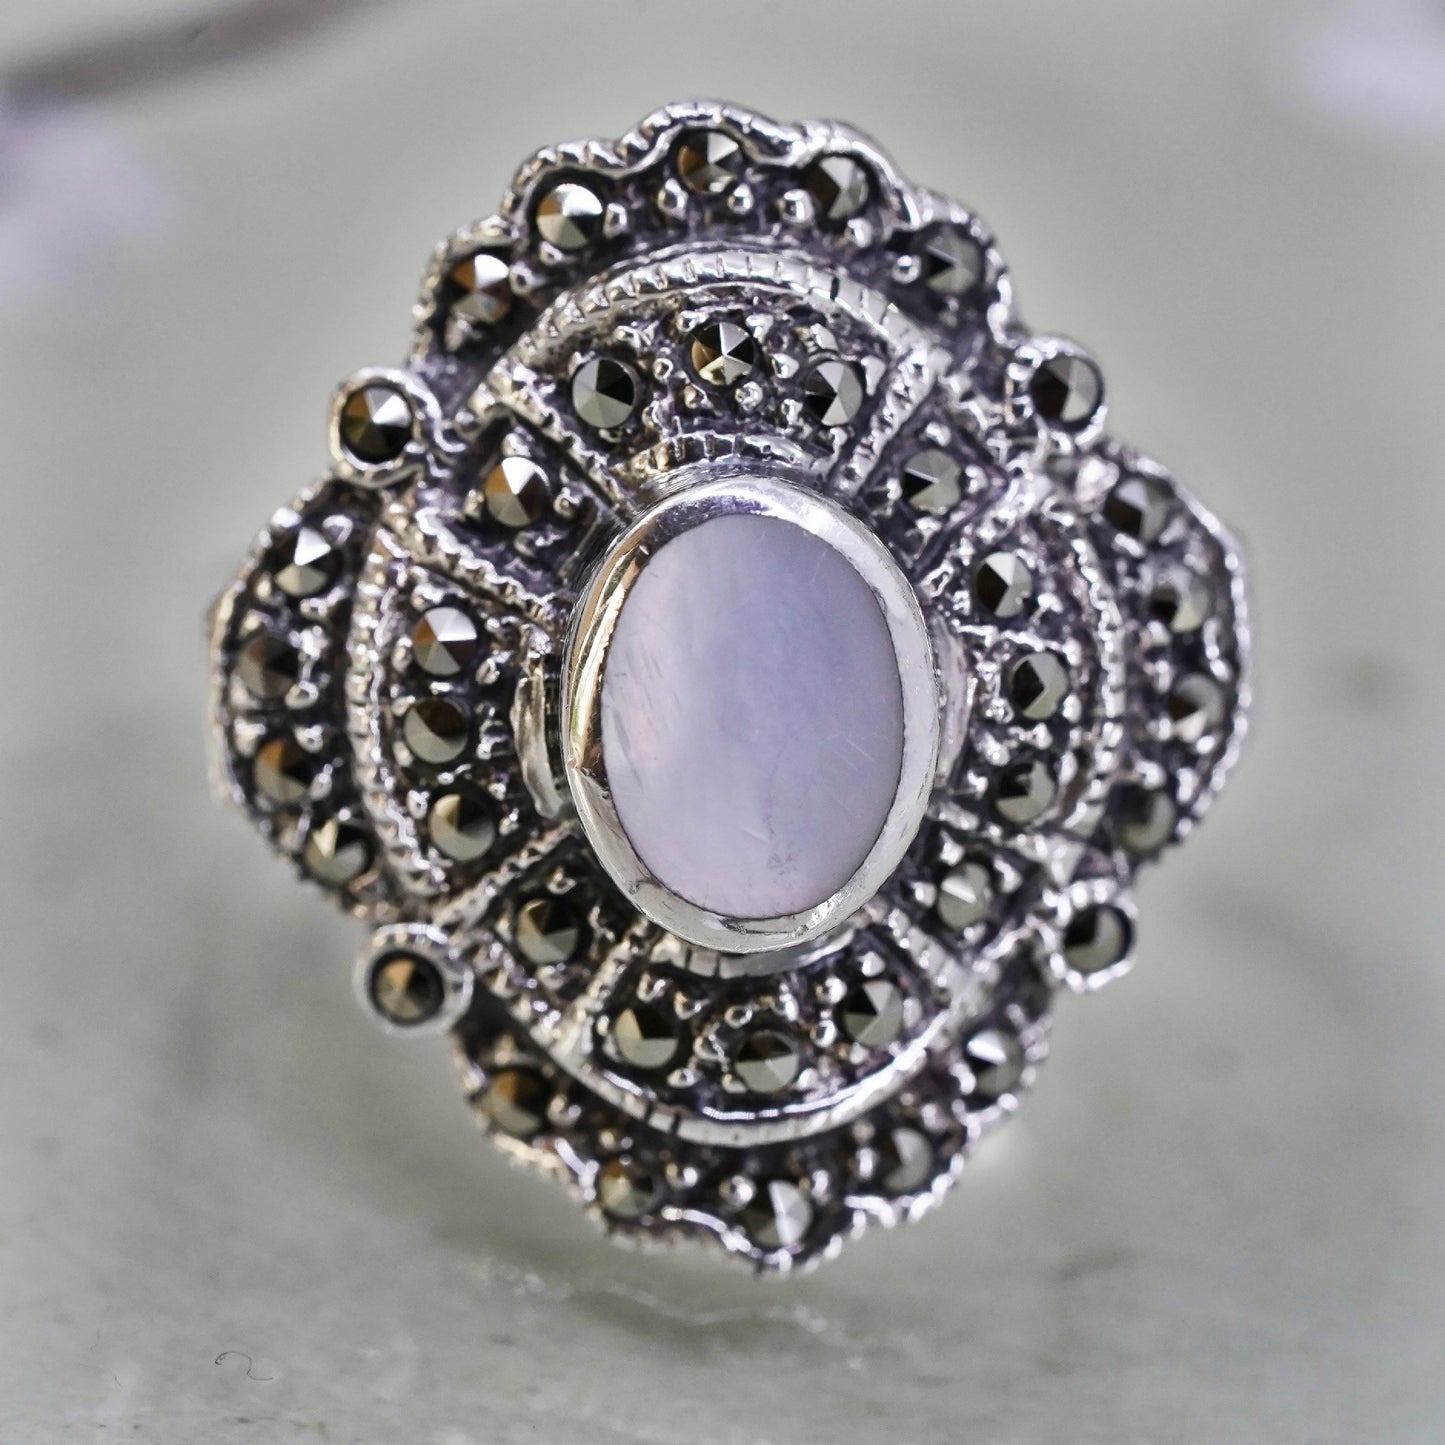 Size 8.25, sterling silver Southwestern 925 ring mother of pearl and marcasite